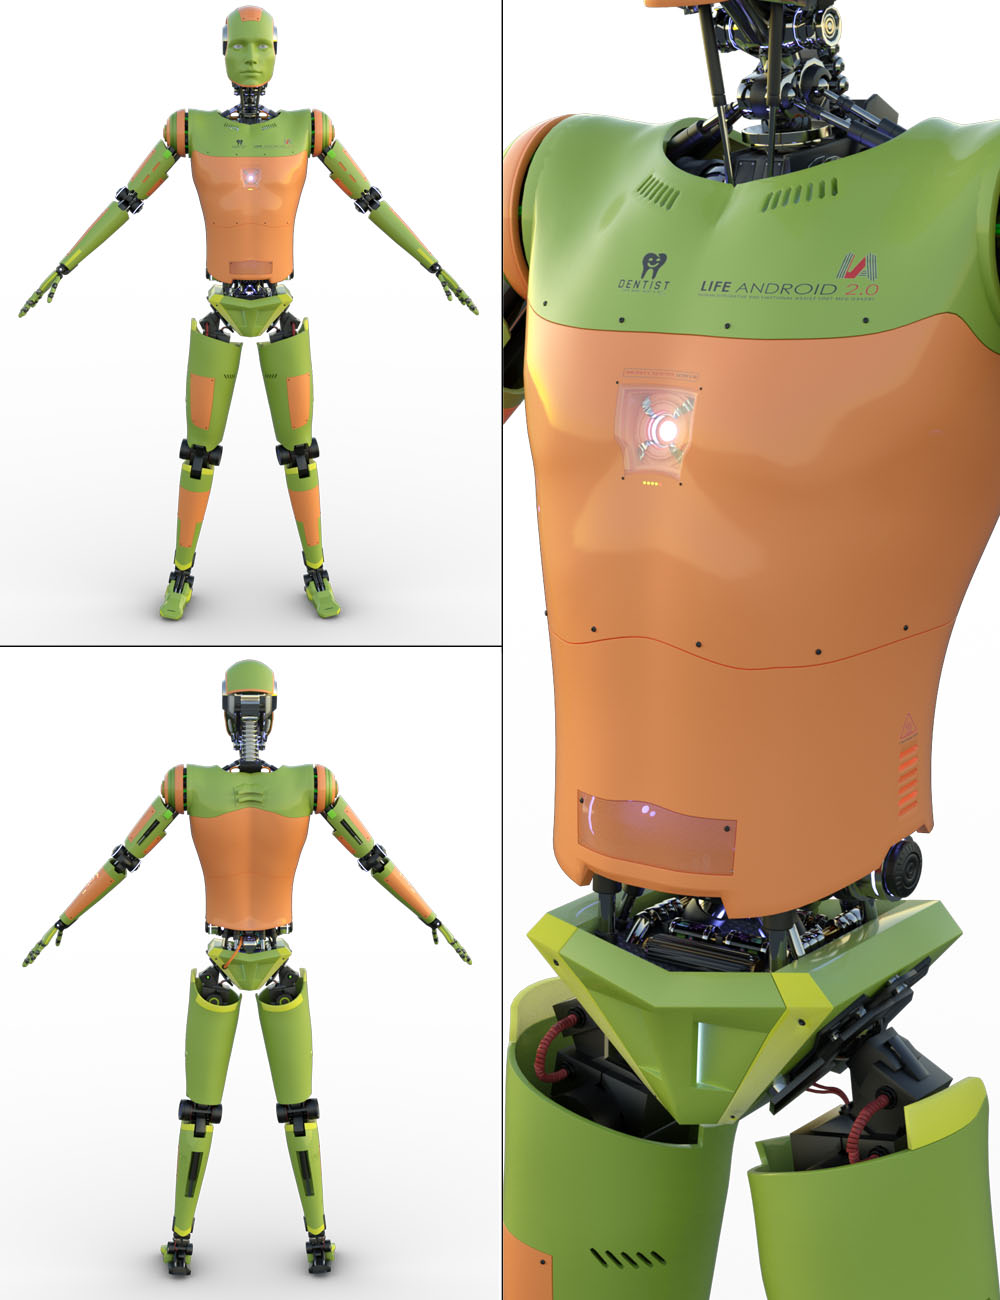 Uniforms for the Male Life 2.0 Android by: ForbiddenWhispers, 3D Models by Daz 3D